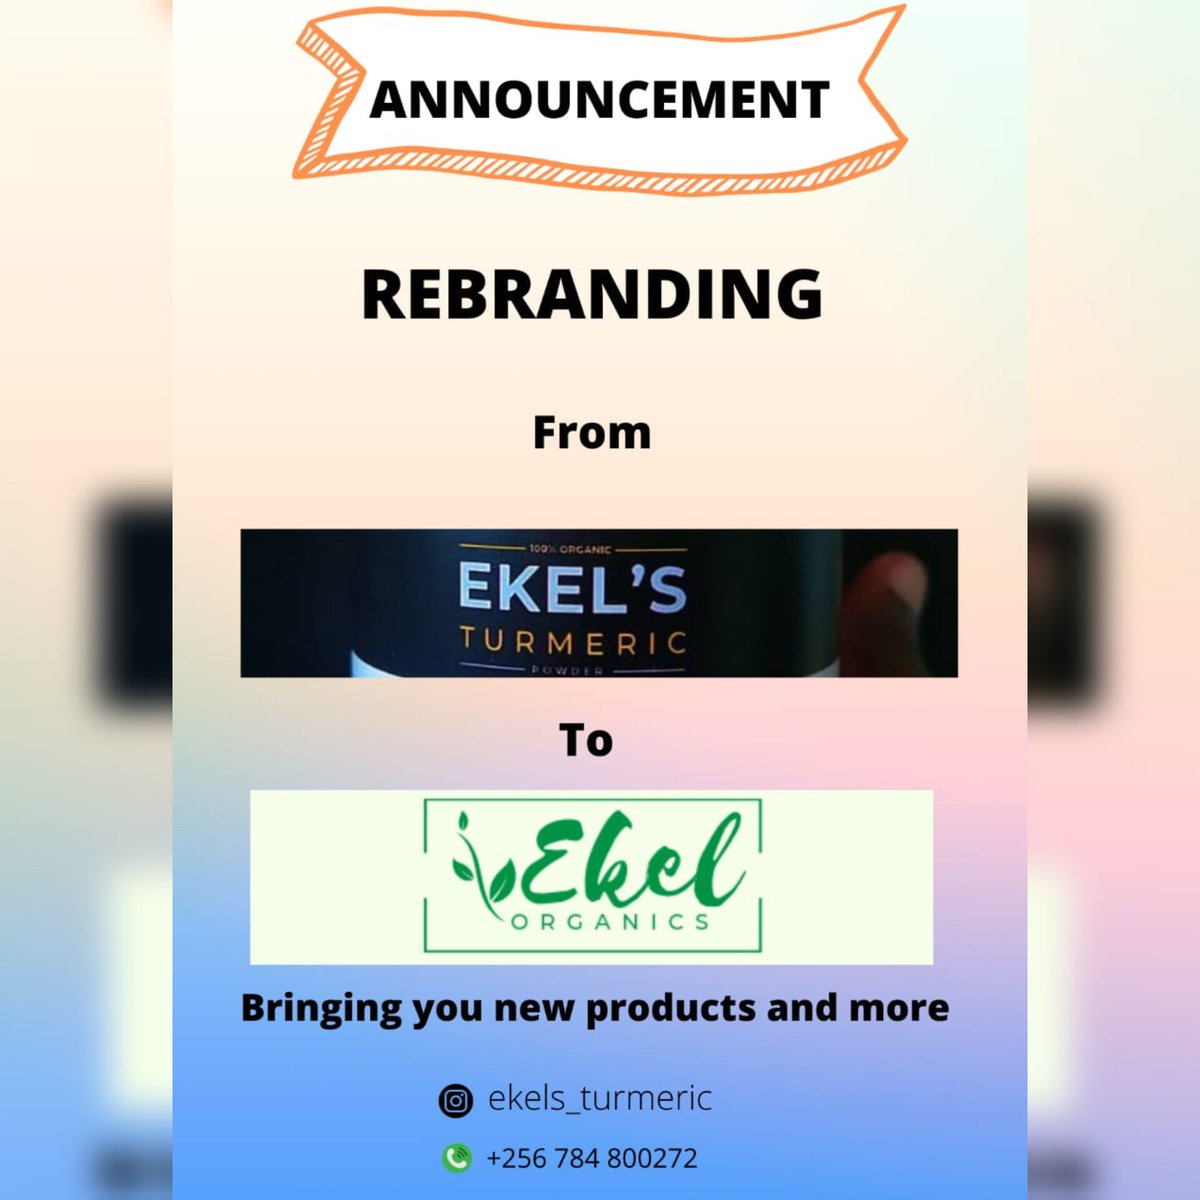 Because we listen to your needs and value you ❤️ we are rebranding from EkelsTurmeric to Ekel organics to offer you more products💃

#organic 
#Turmeric
#orgnicproducts